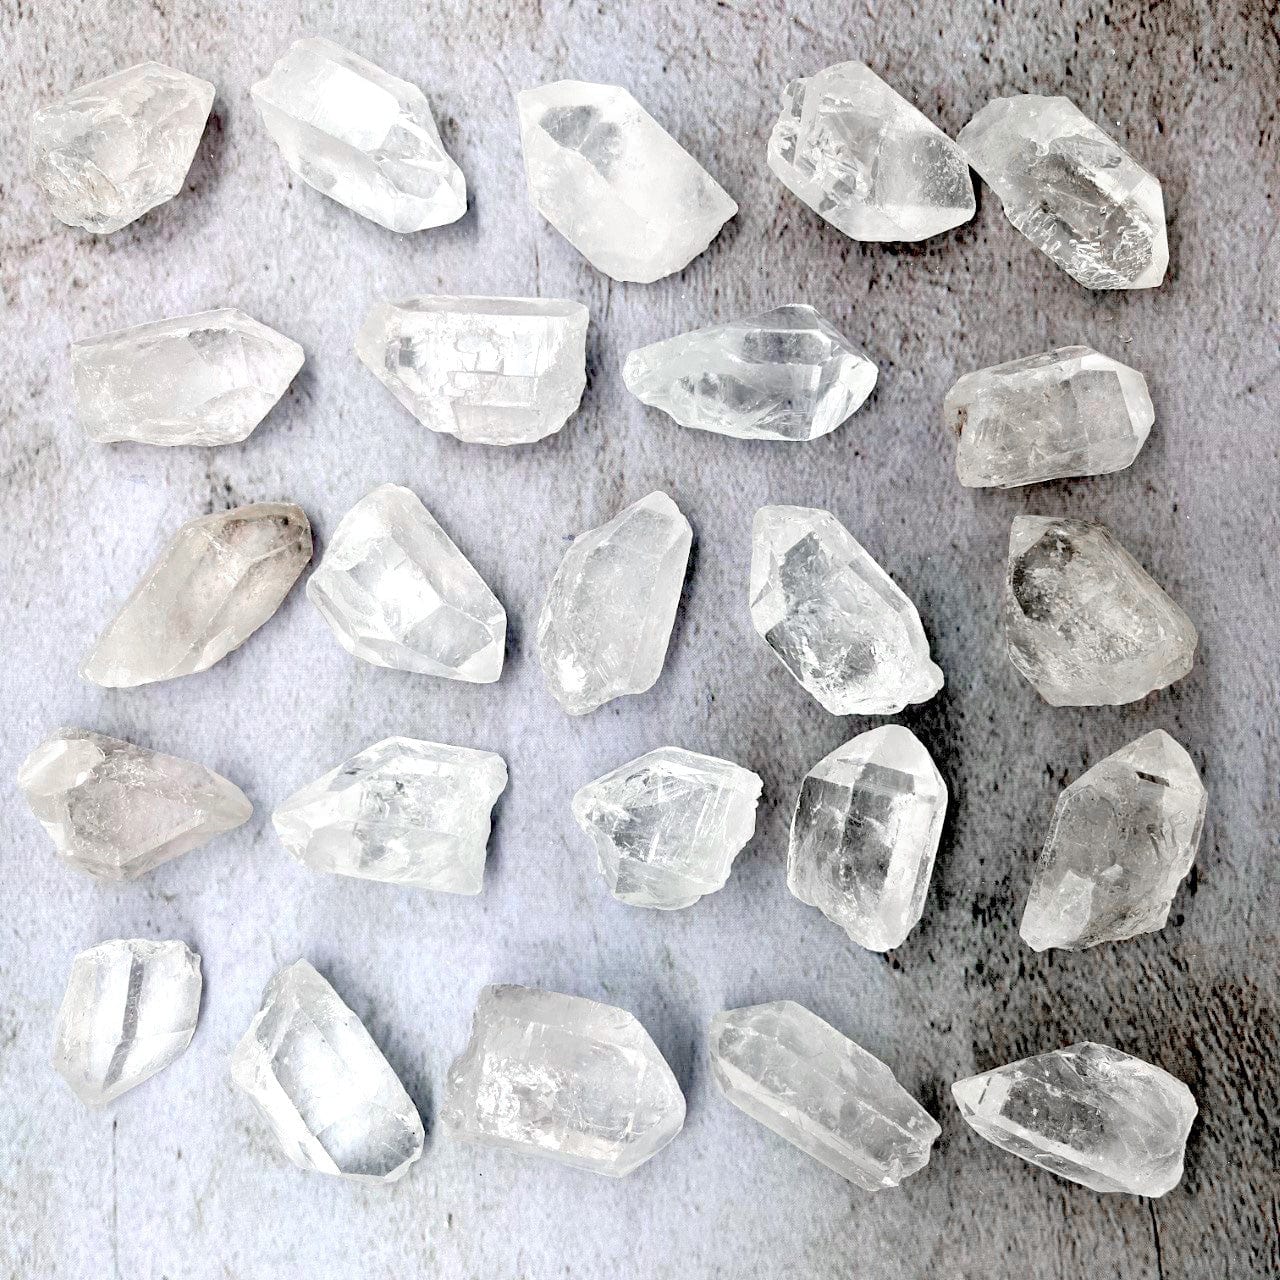 Crystal Quartz Natural Stone Points laid out on a table